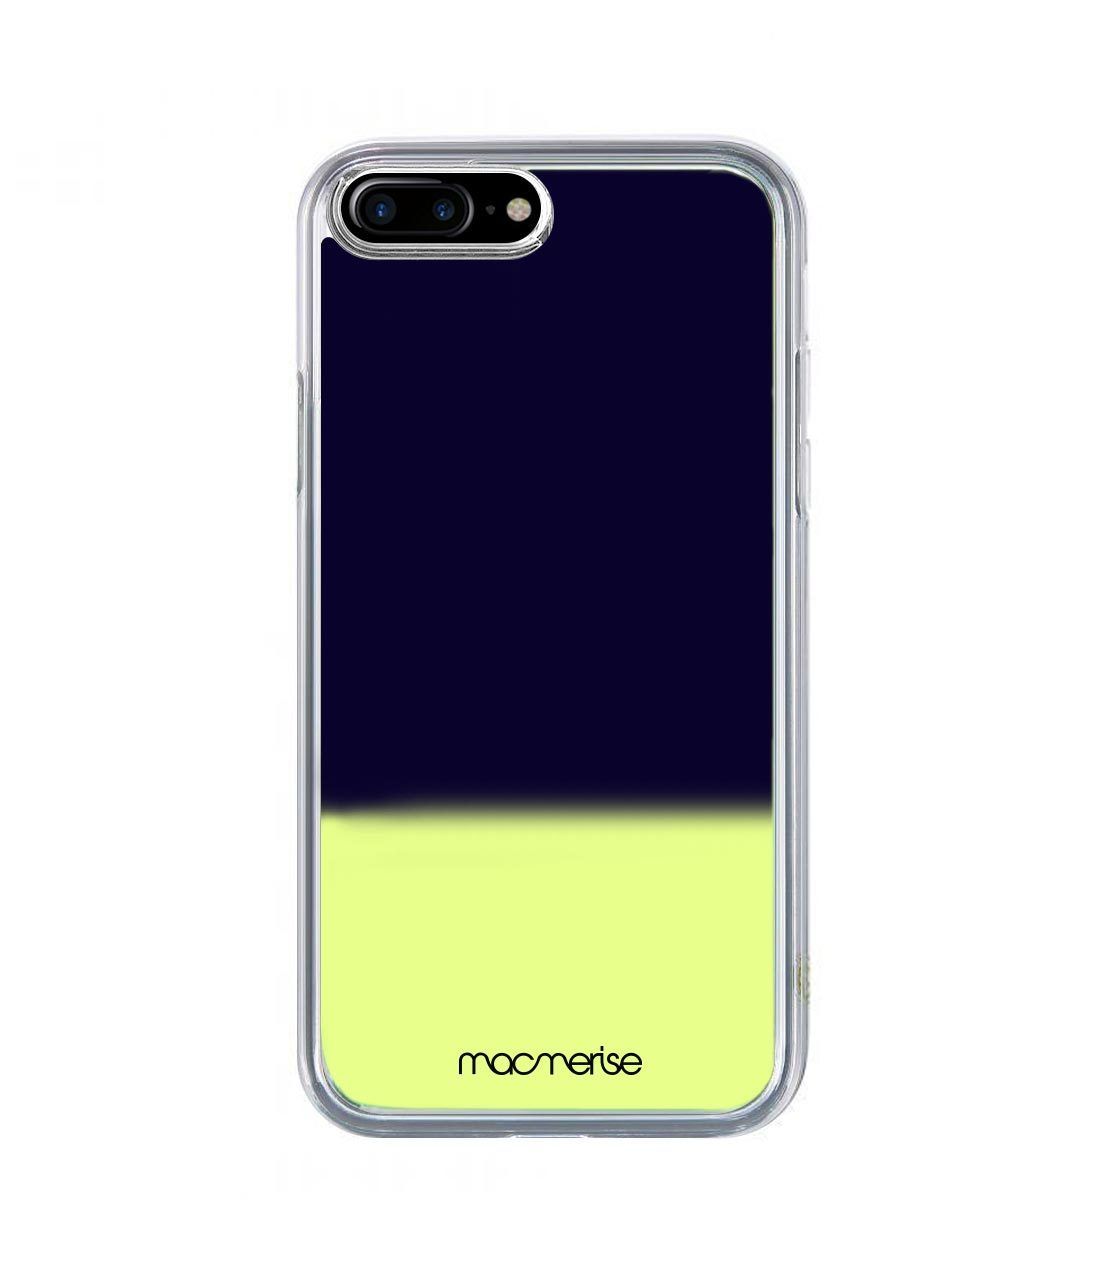 Neon Sand Blue - Neon Sand Phone Case for iPhone 7 Plus